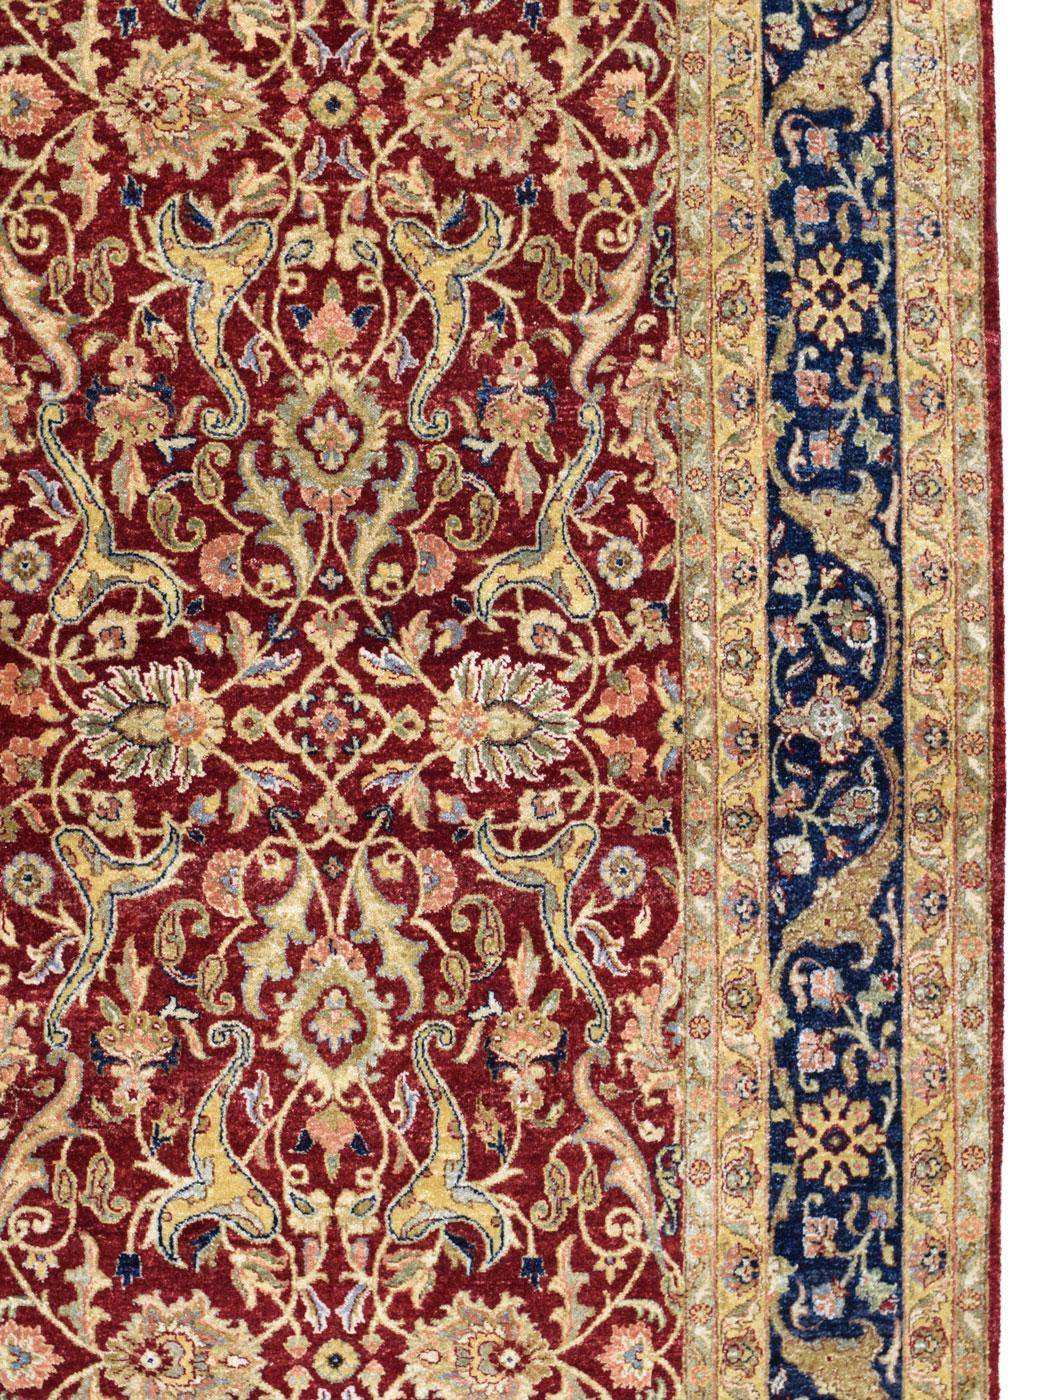 Contemporary Romantic Red, Taupe, and Indigo Hand Knotted Wool Lavar Carpet, 6' x 9' For Sale